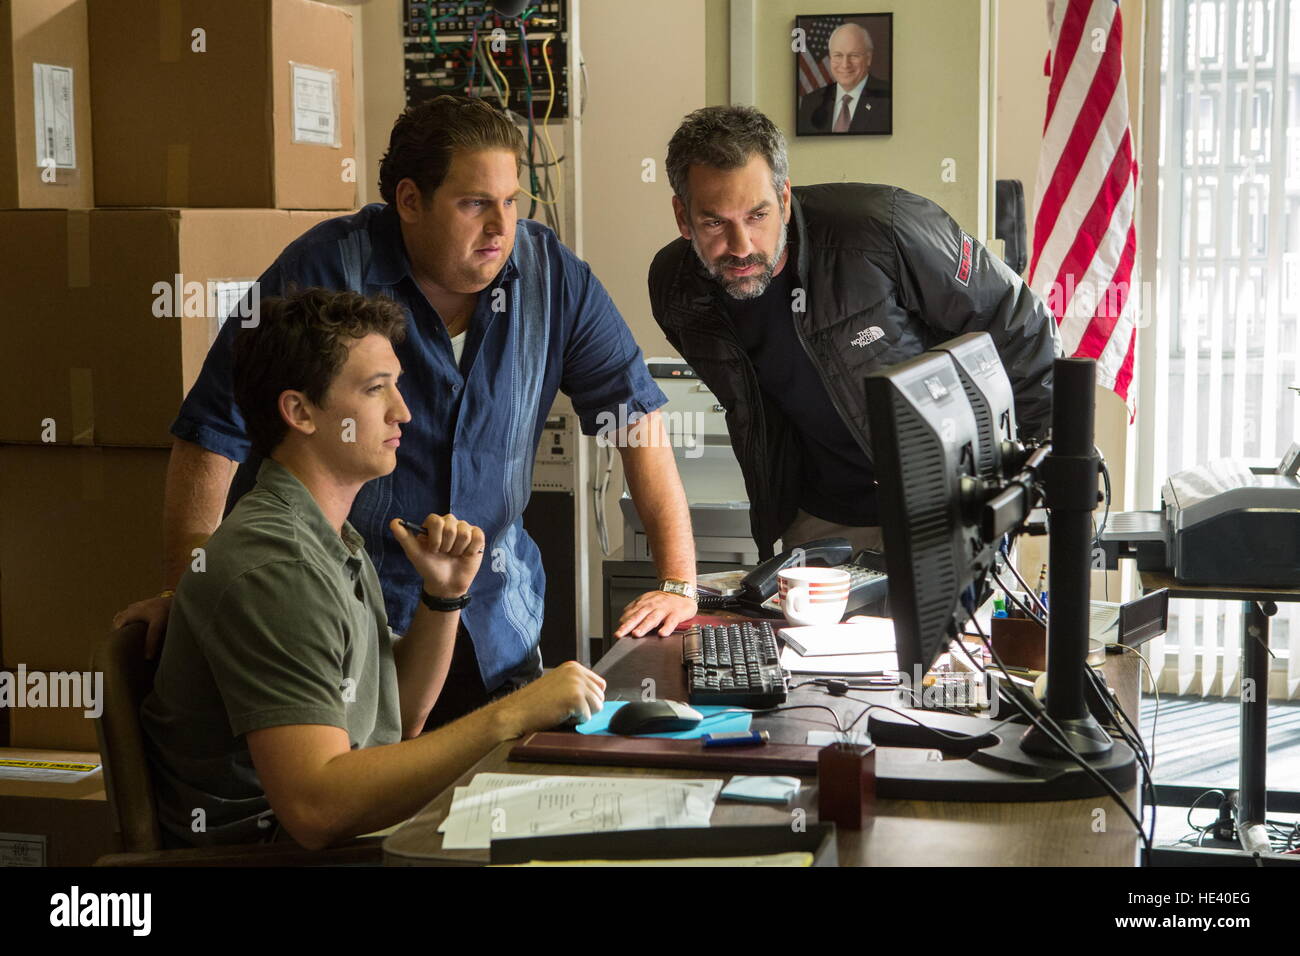 RELEASE DATE: August 19, 2016 TITLE: War Dogs STUDIO: DIRECTOR: Todd Phillips PLOT: Based on the true story of two young men, David Packouz and Efraim Diveroli, who won a $300 million contract from the Pentagon to arm America's allies in Afghanistan STARRING: JONAH HILL, MILES TELLER (Credit: © Green Hat Films/Entertainment Pictures/ZUMAPRESS.com) Stock Photo